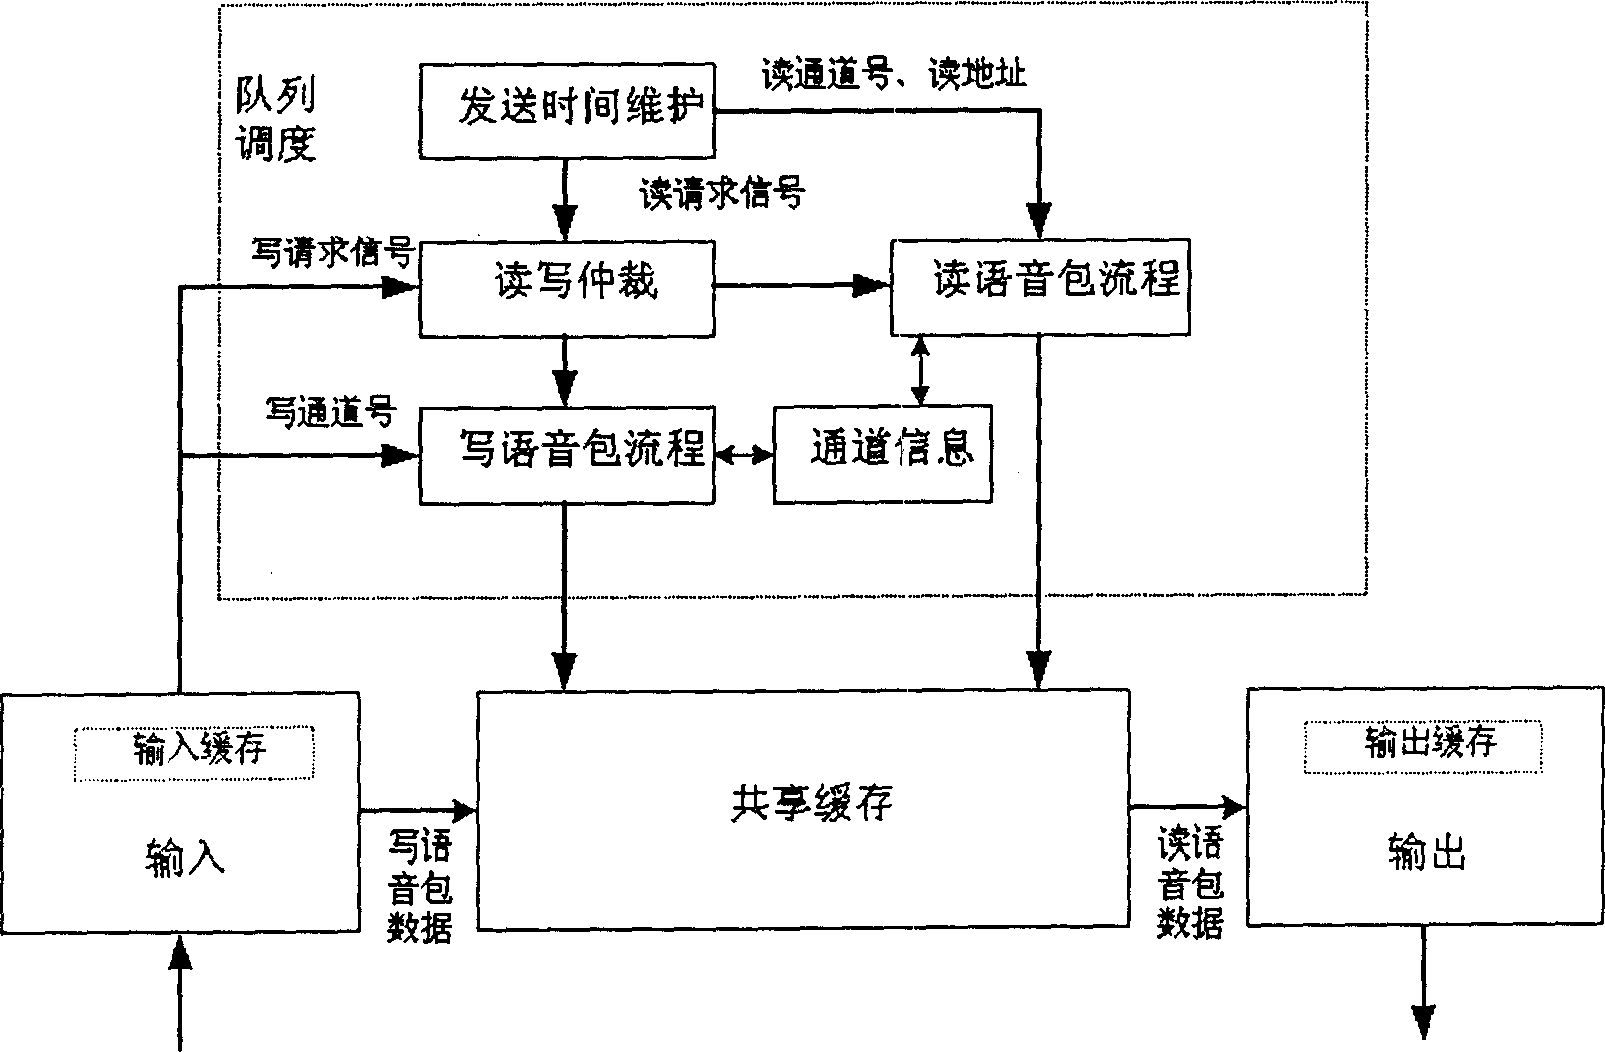 Large capacity realtime stream processing method for removing dithering in buffer memory